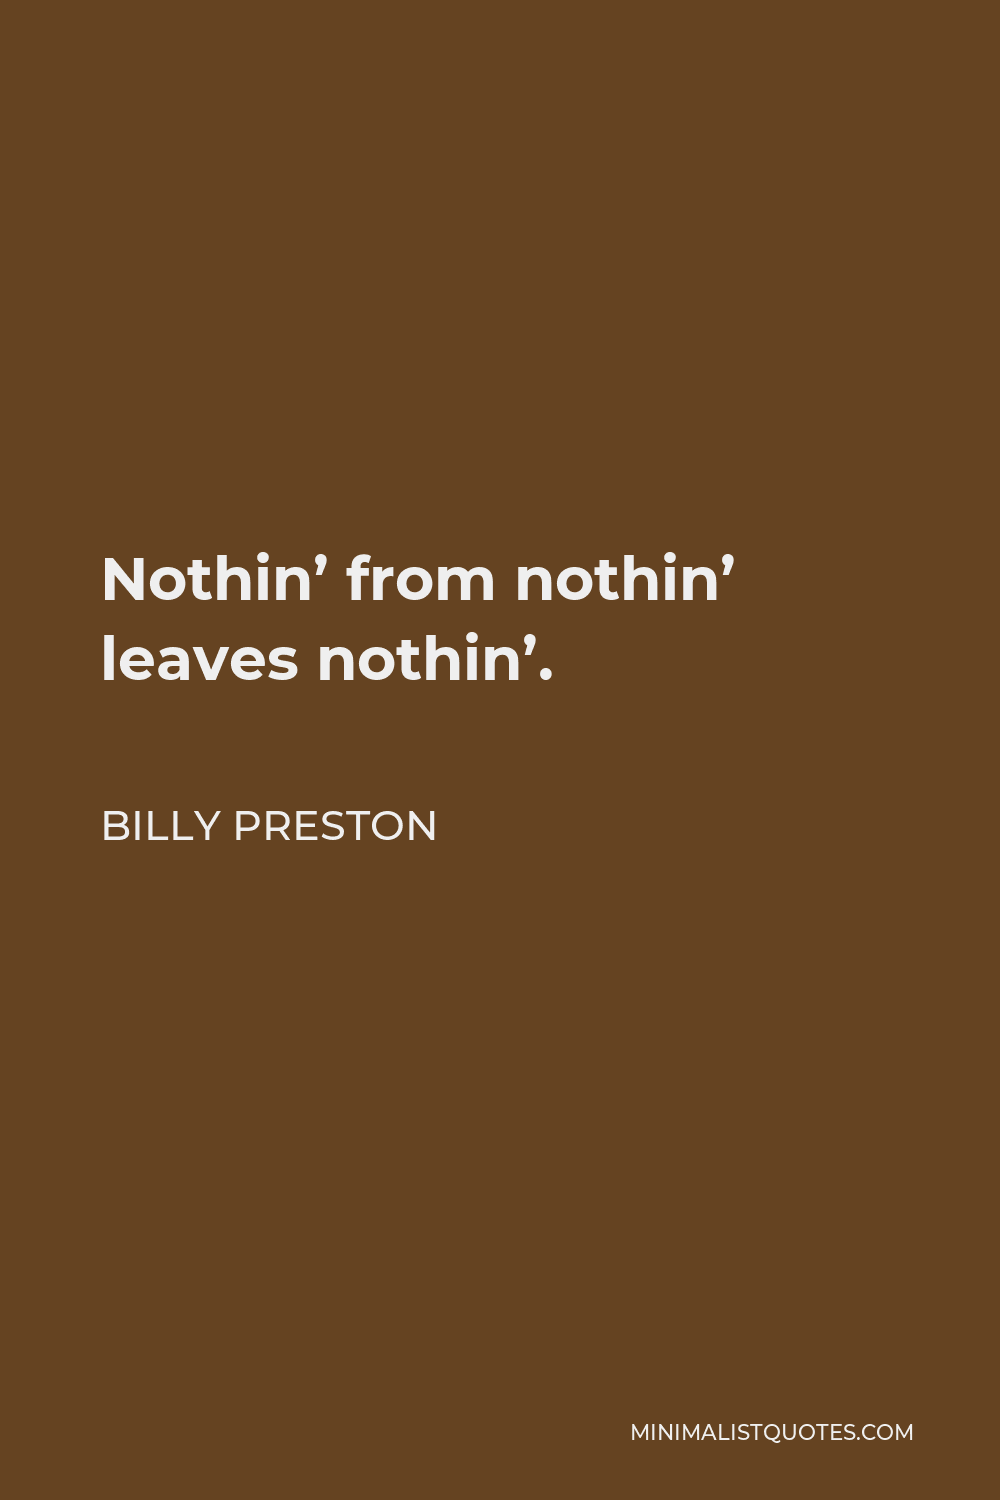 Billy Preston Quote - Nothin’ from nothin’ leaves nothin’.